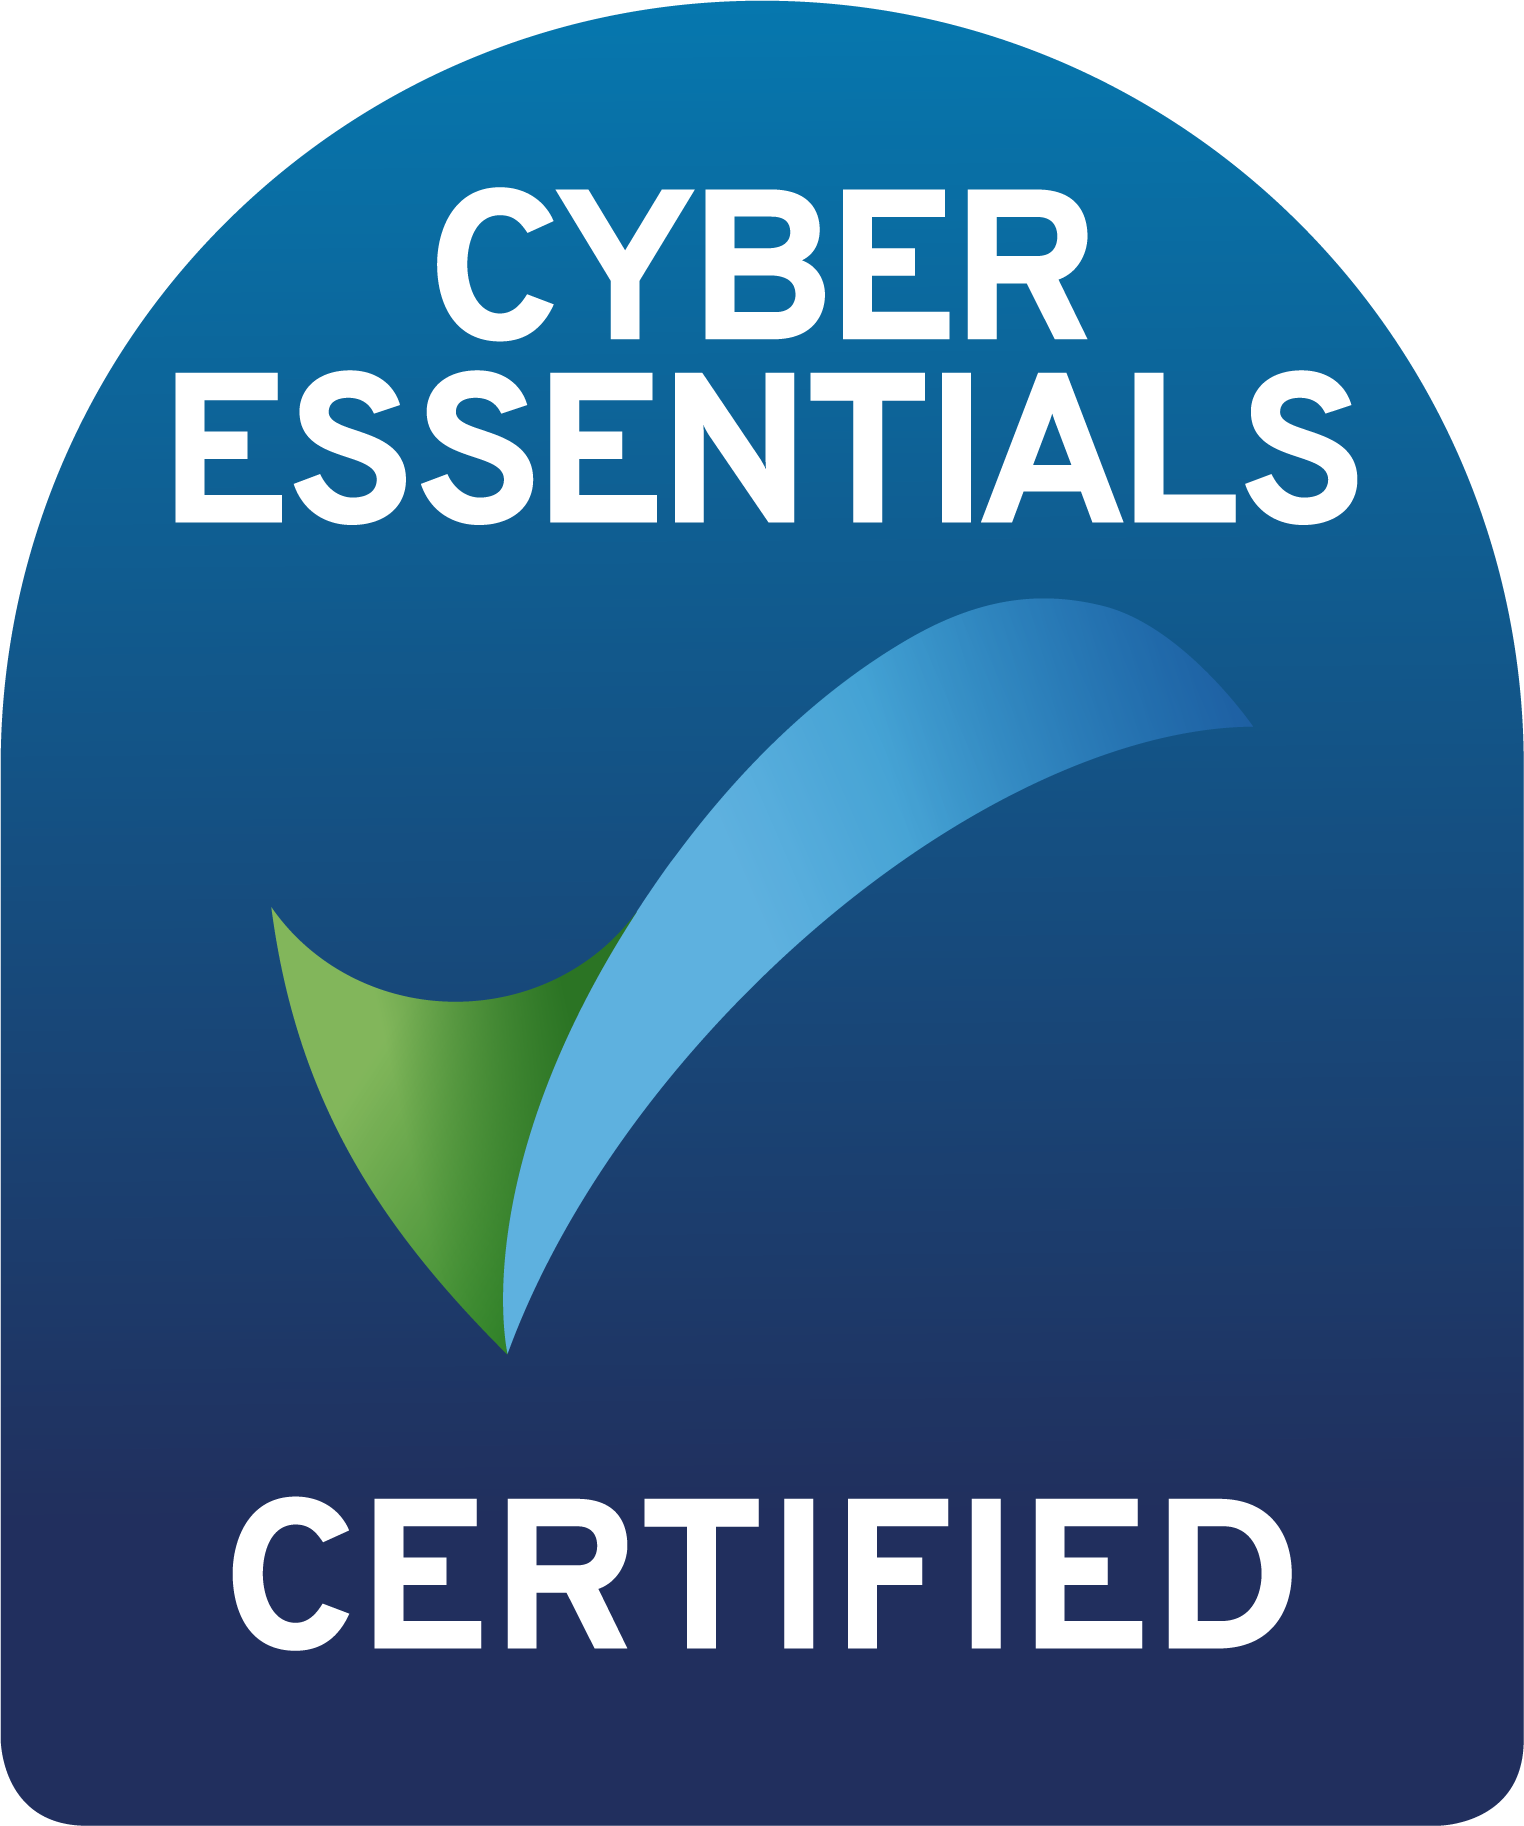 FVA has Cyber Essential assurance certification for digital security